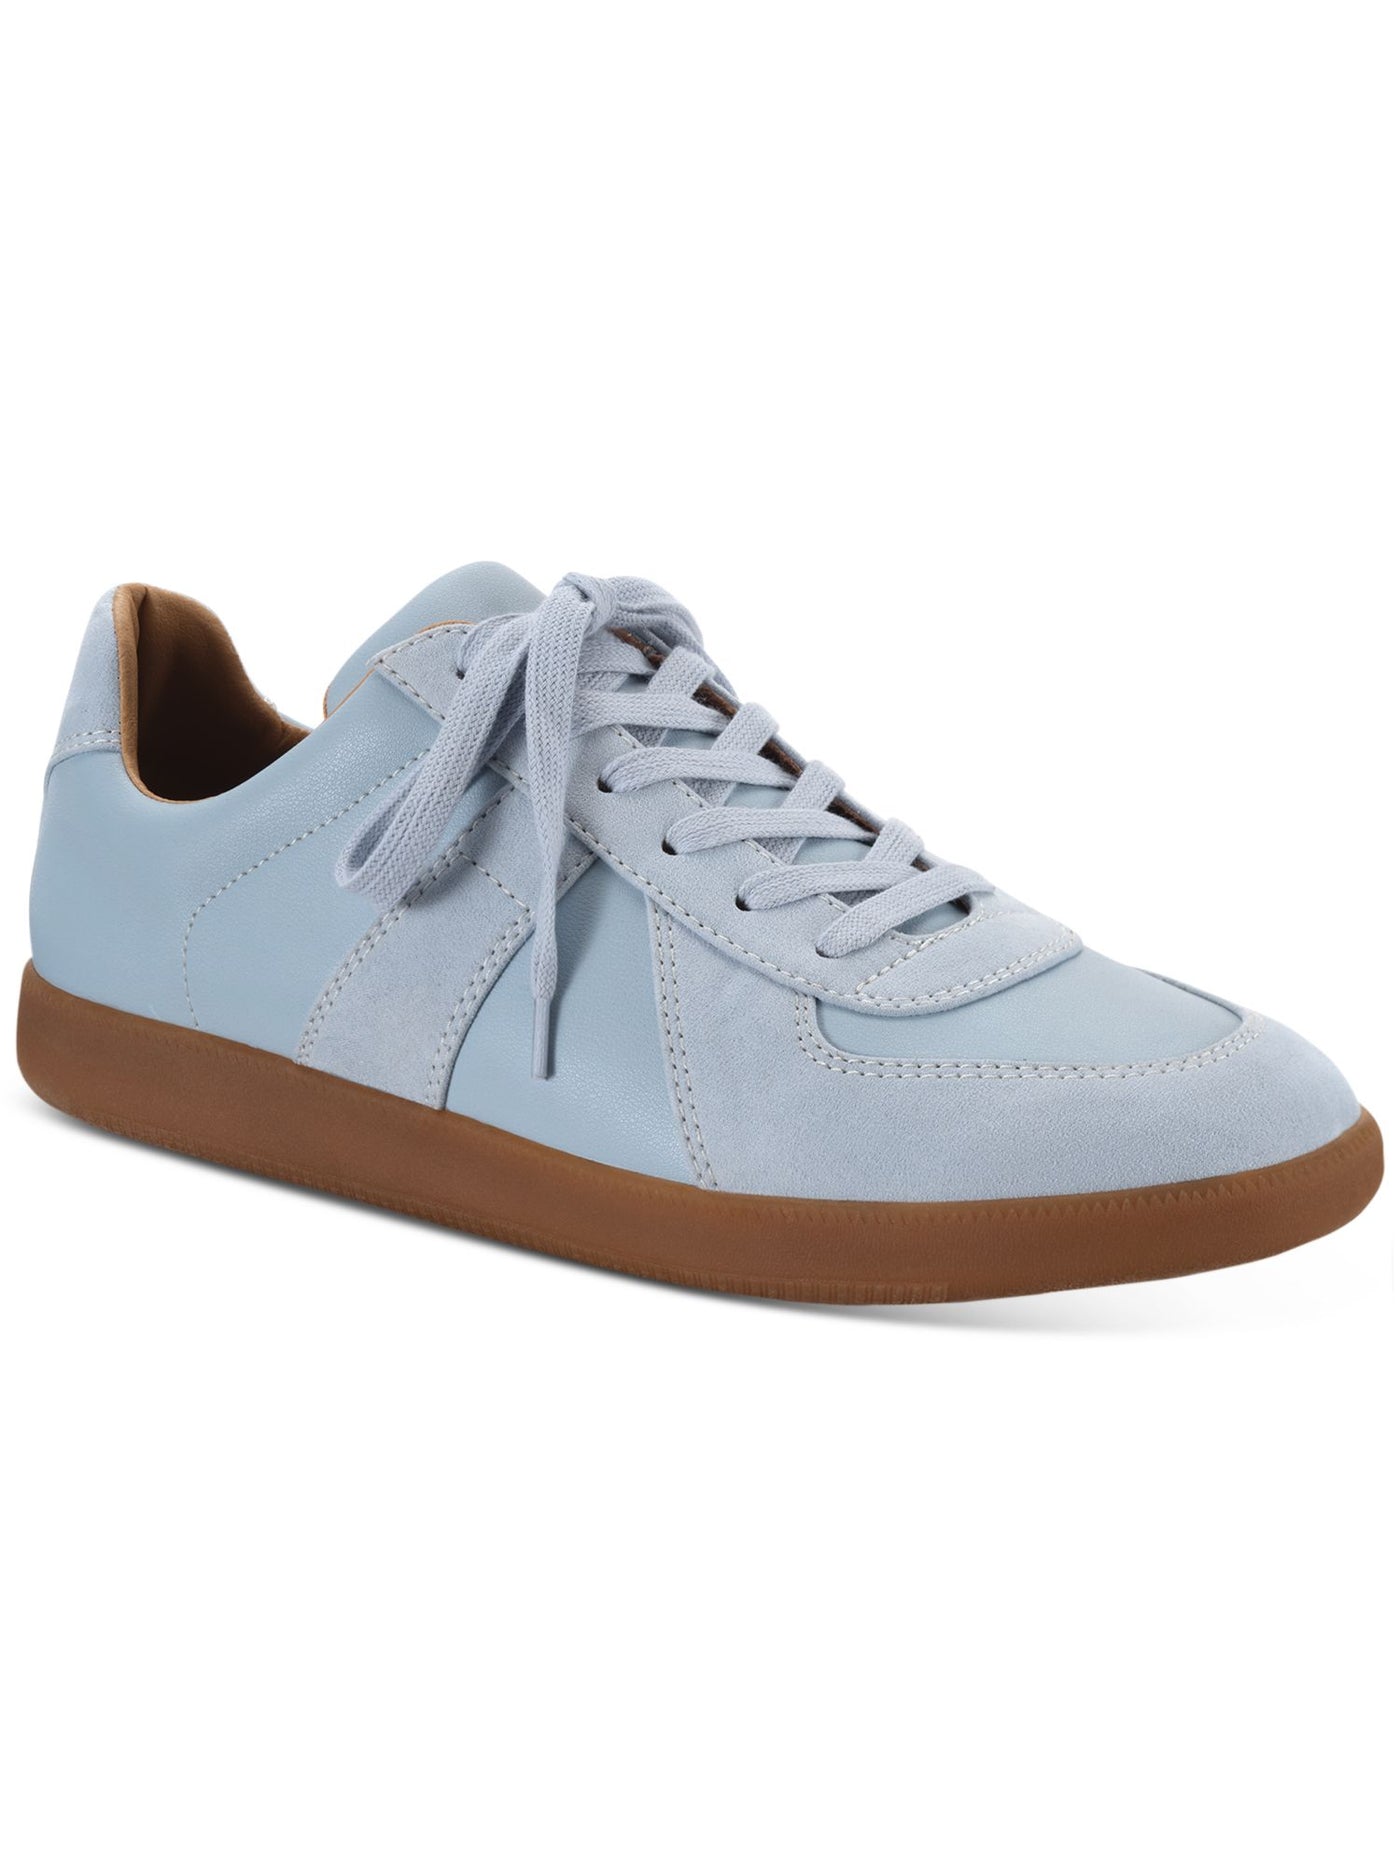 INC Mens Light Blue Padded Harlan Round Toe Platform Lace-Up Athletic Sneakers Shoes 11 M